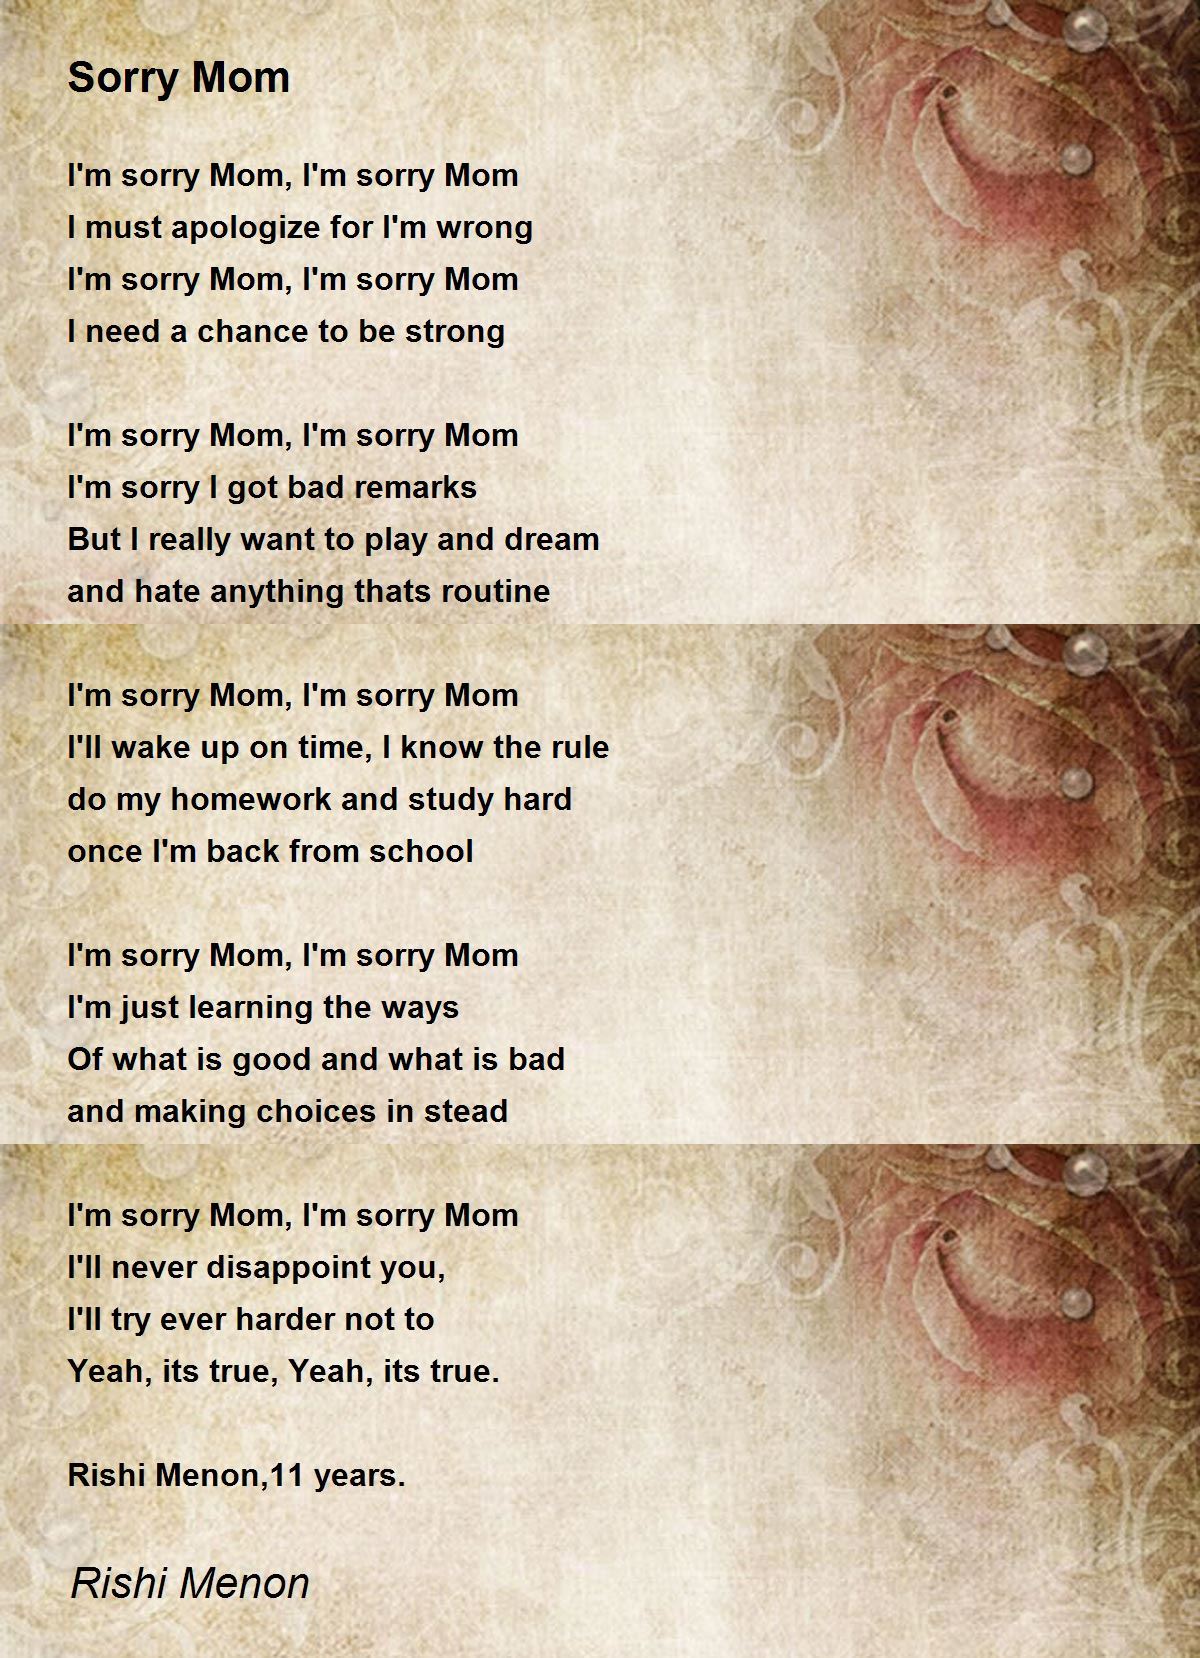 Poems about being sorry